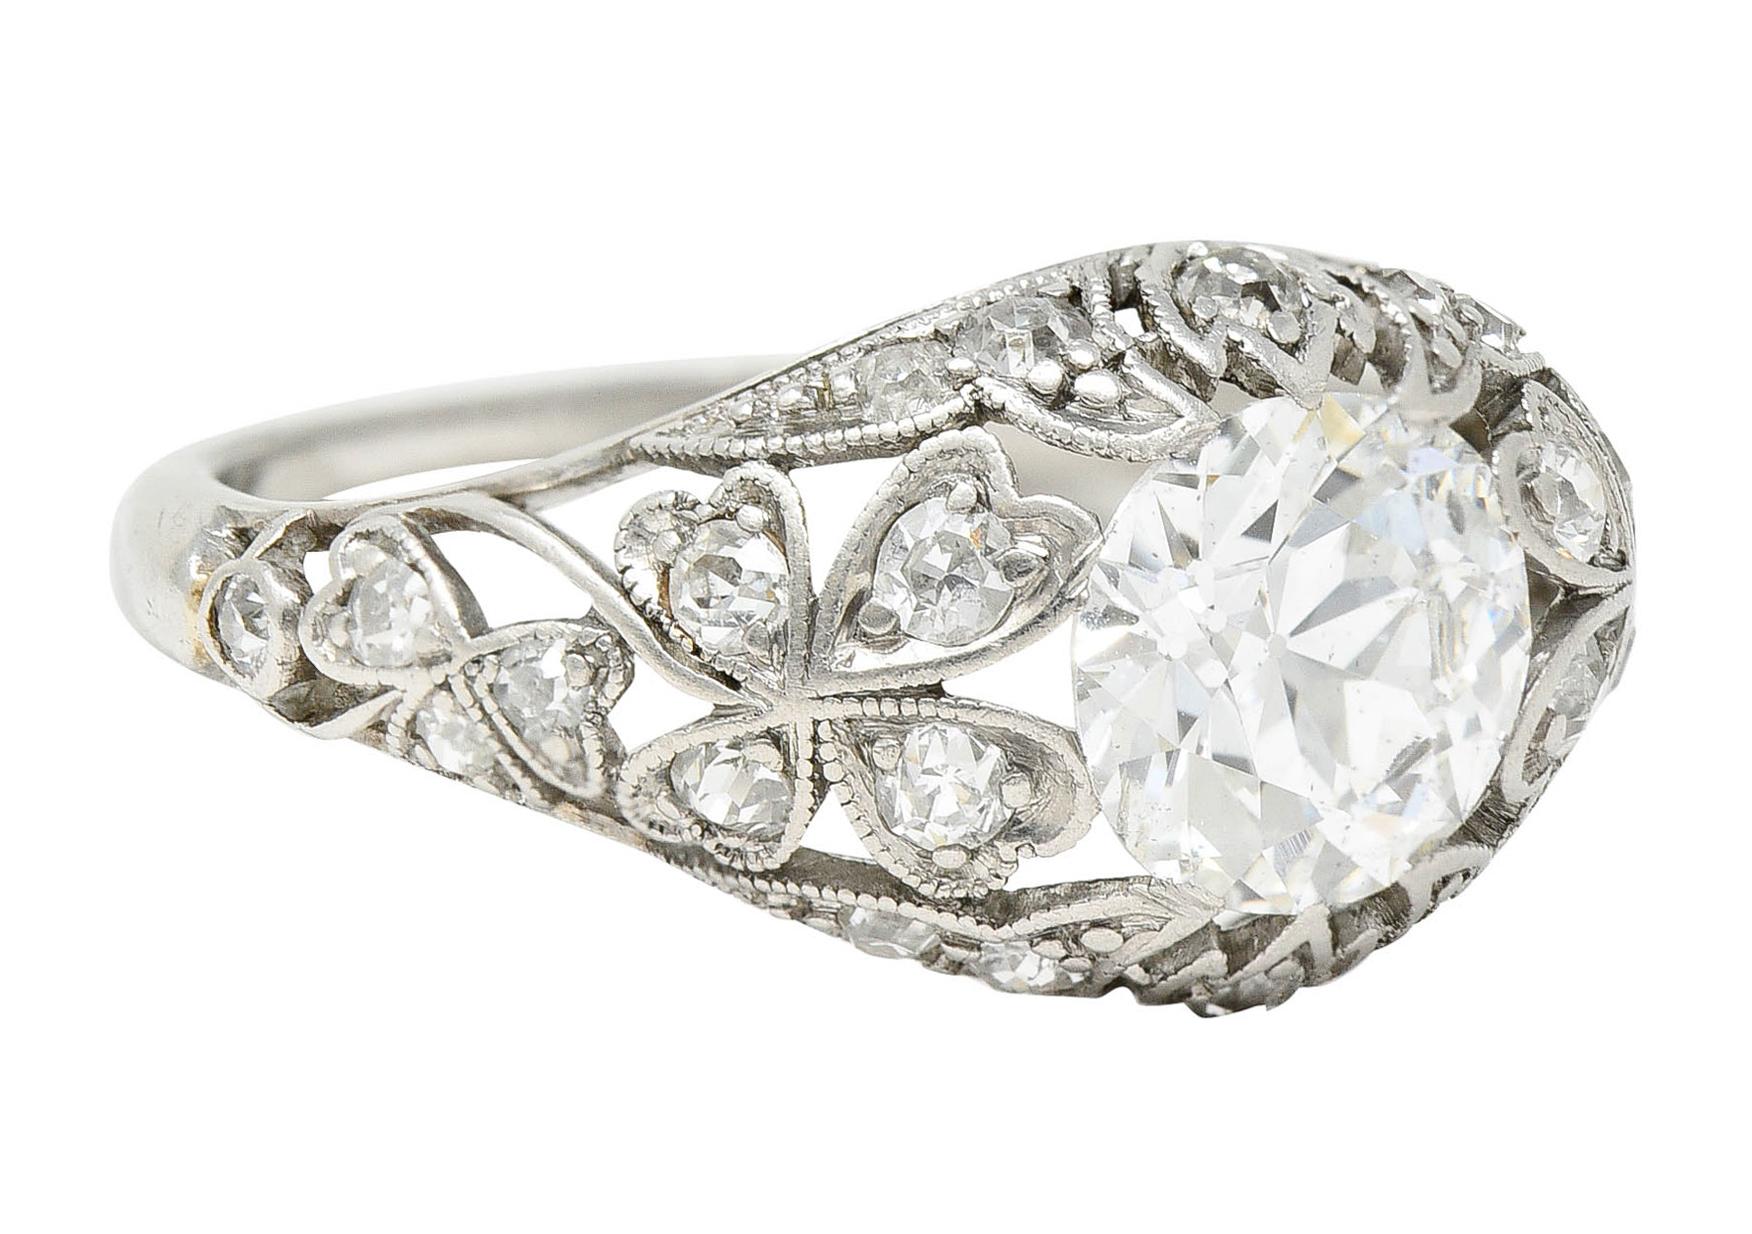 Bombè style band is pierced - featuring lily of the valley and clover motifs

Centering a transitional cut diamond weighing approximately 1.05 carats - H color with SI2 clarity

Accented throughout by old European cut diamonds weighing in total